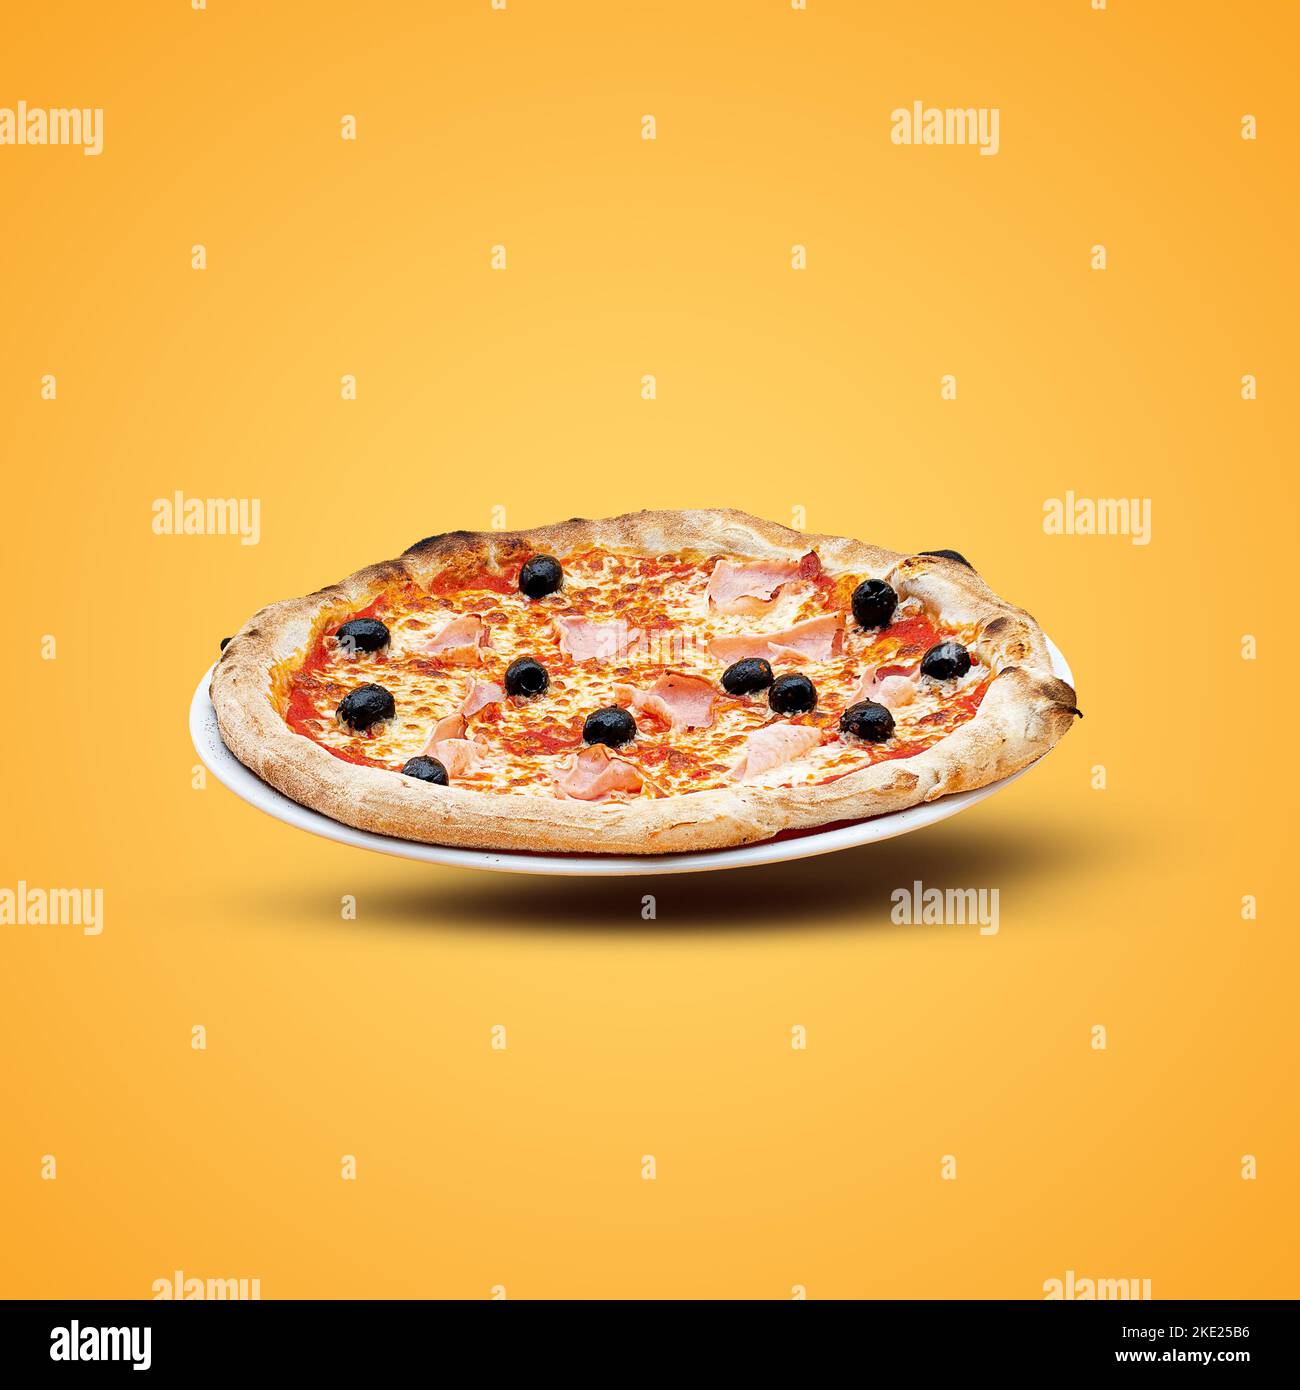 Homemade Italian pizza with cheese and olives  on a yellow background. Top view. Stock Photo